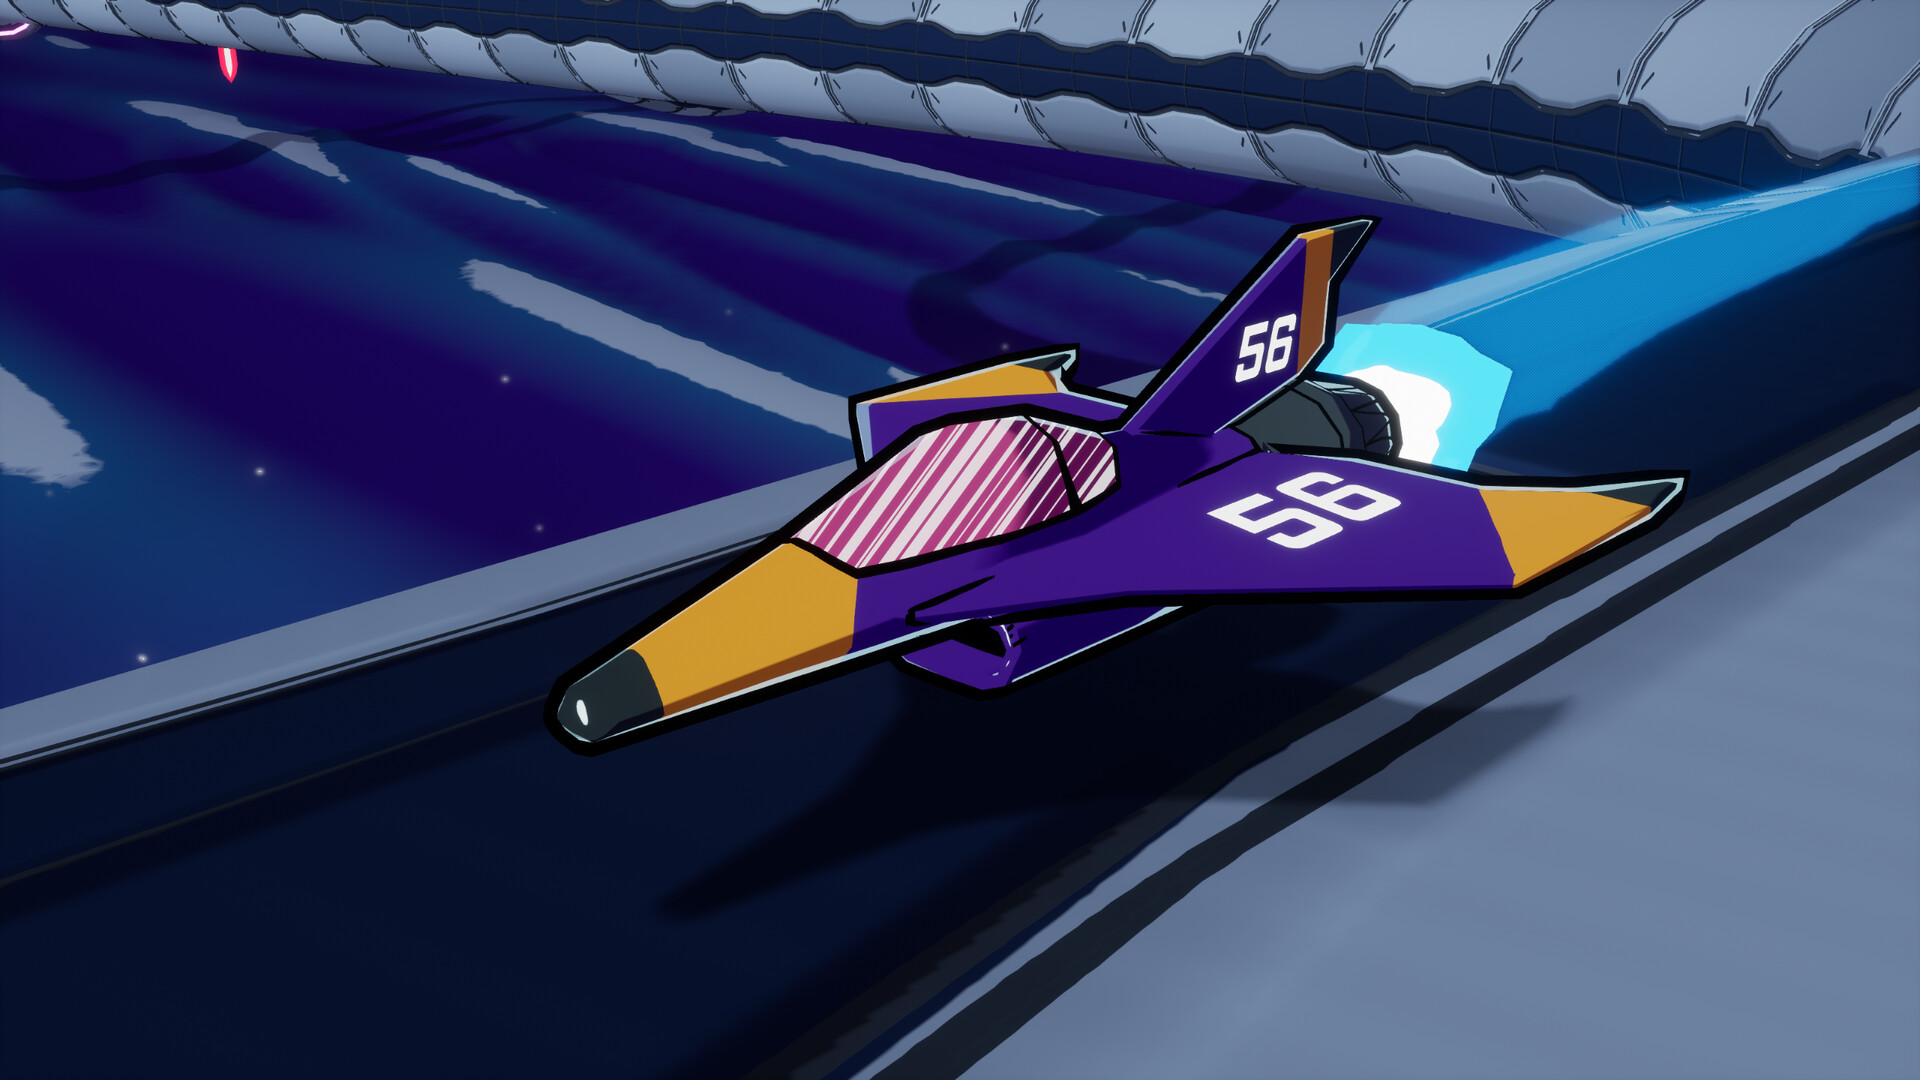 Aero GPX Is an F-Zero-Like Racer on Kickstarter with a Demo to Try